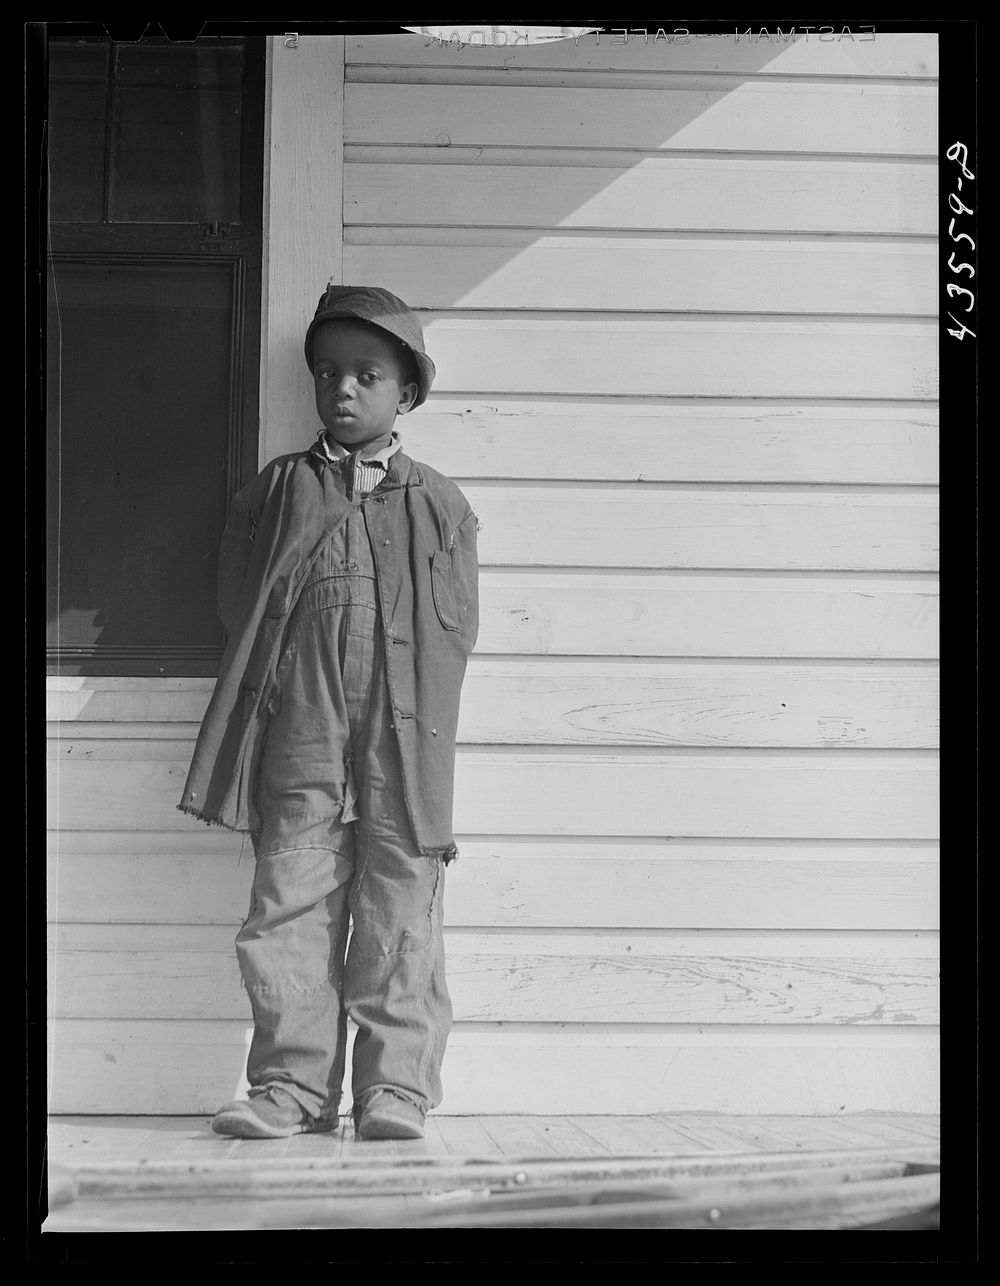 [Untitled photo, possibly related to: This family was relocated at FSA (Farm Security Administration) Orangeburg Farms when…